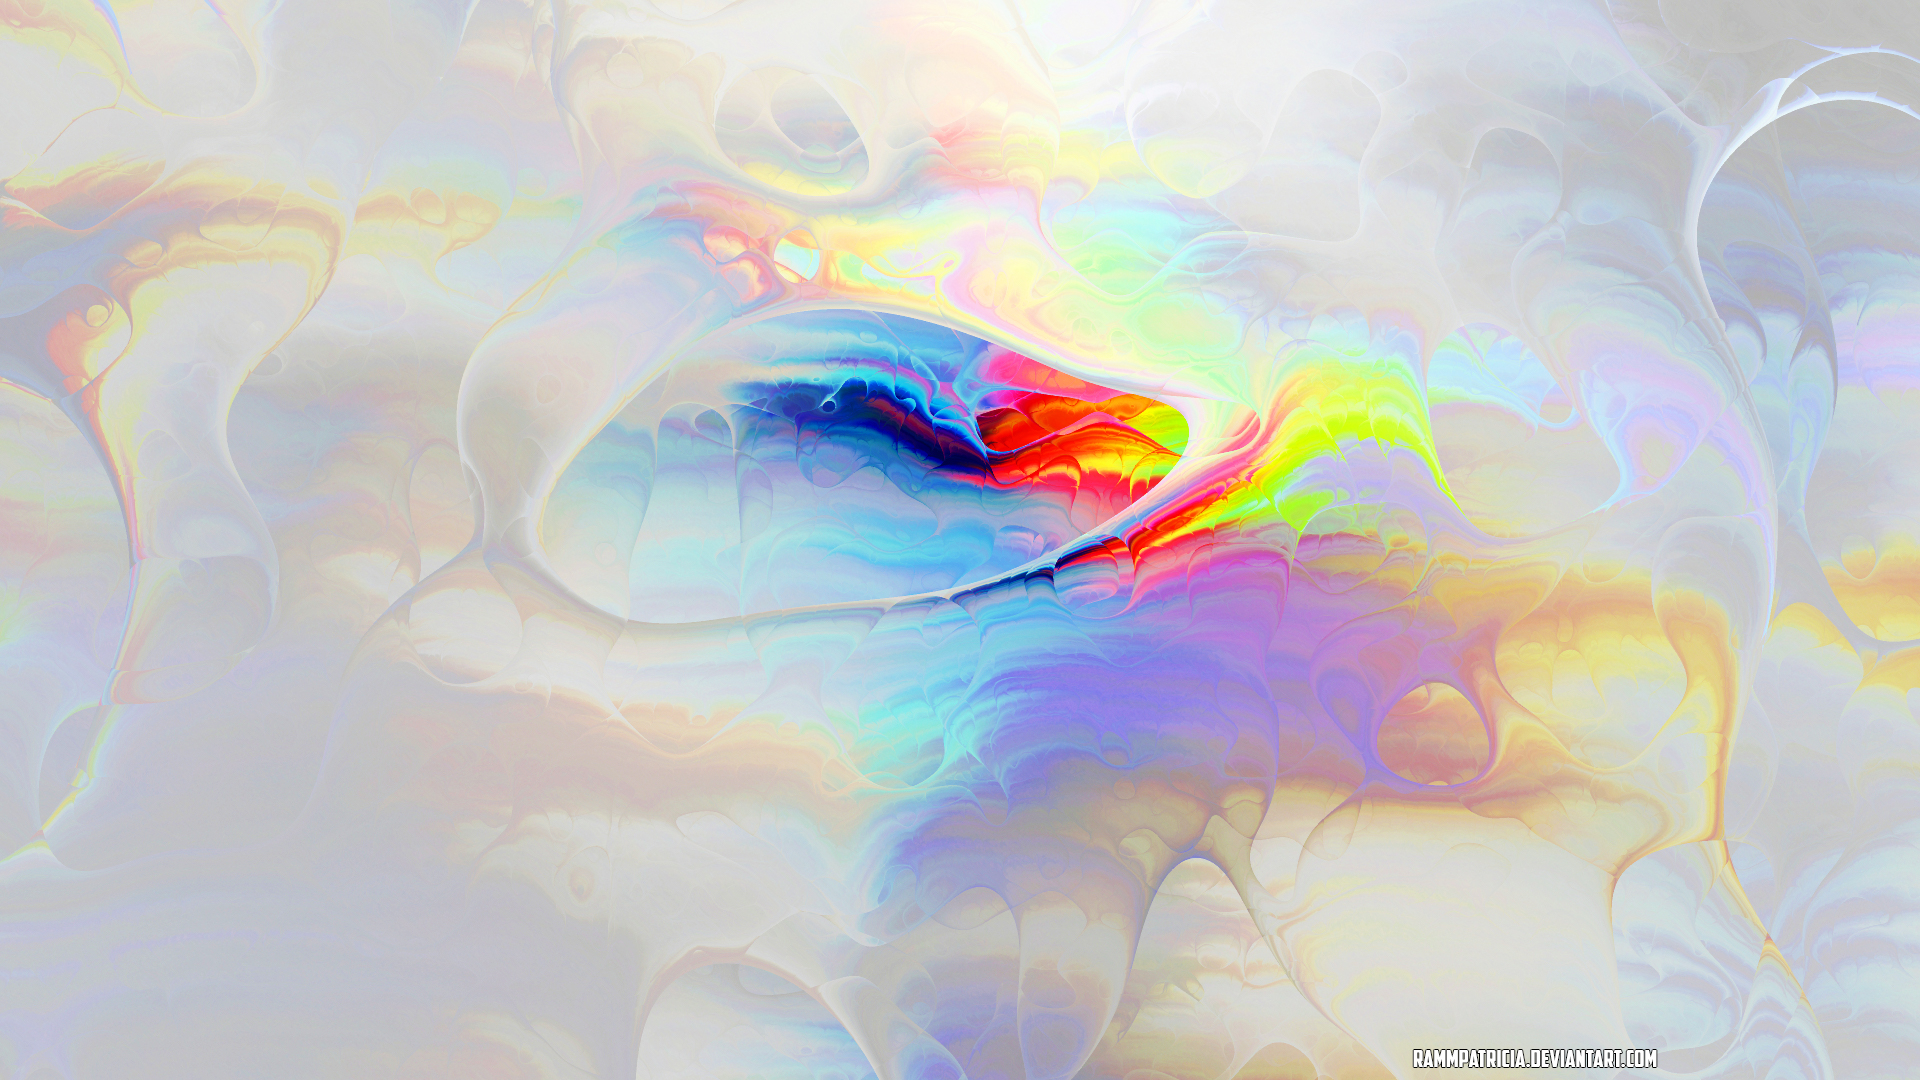 General 1920x1080 abstract colorful digital art RammPatricia